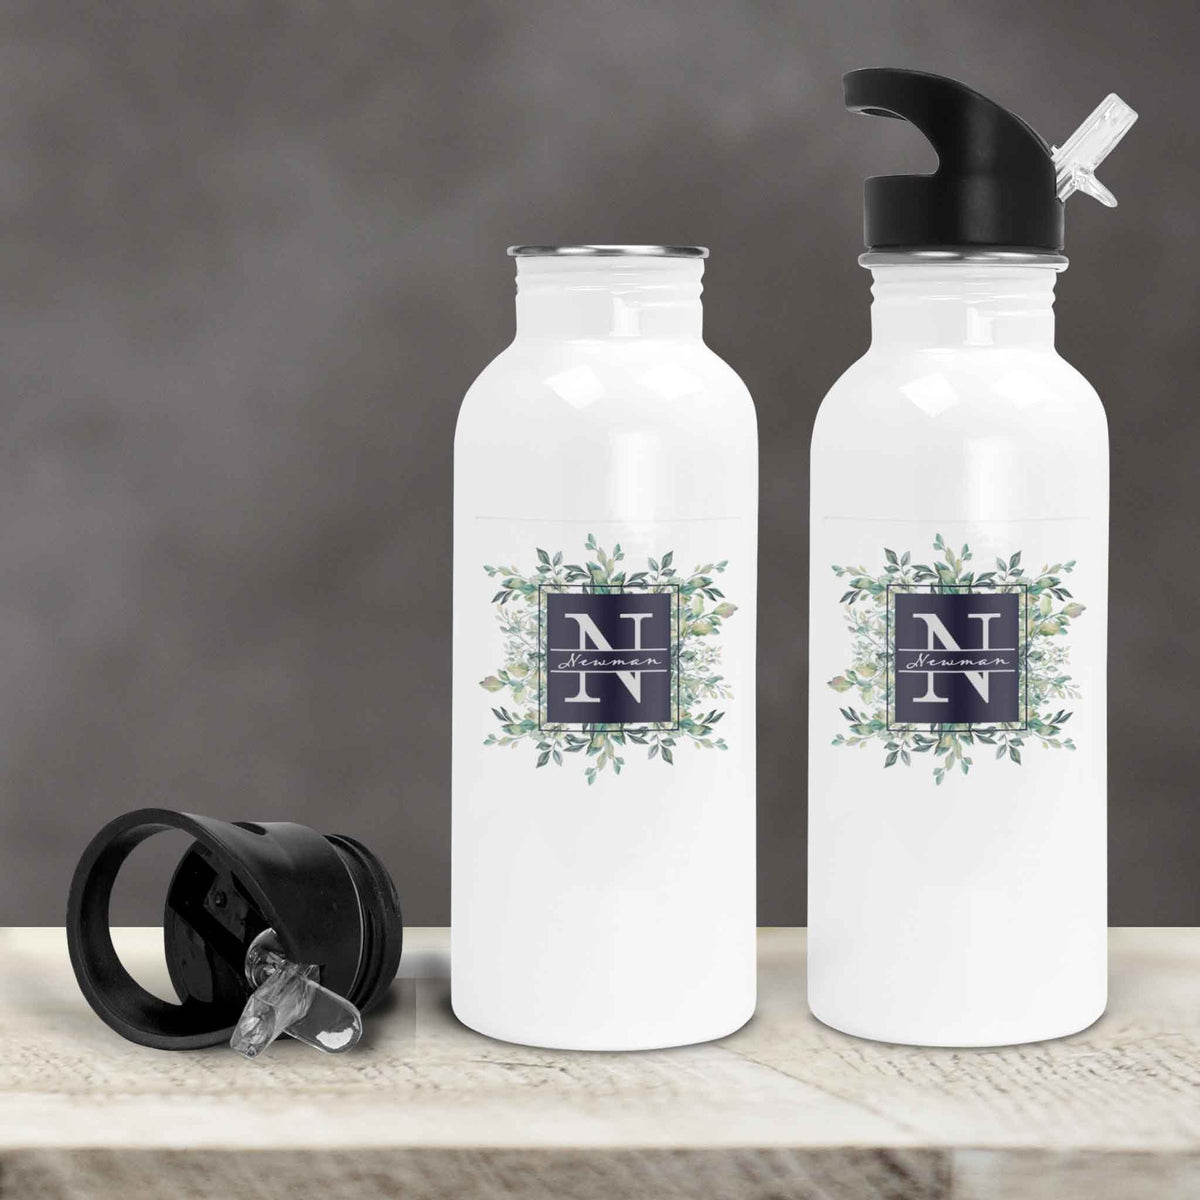 Personalized Water Bottles | Custom Stainless Steel Water Bottles | 30 oz | Succelent Bouquet